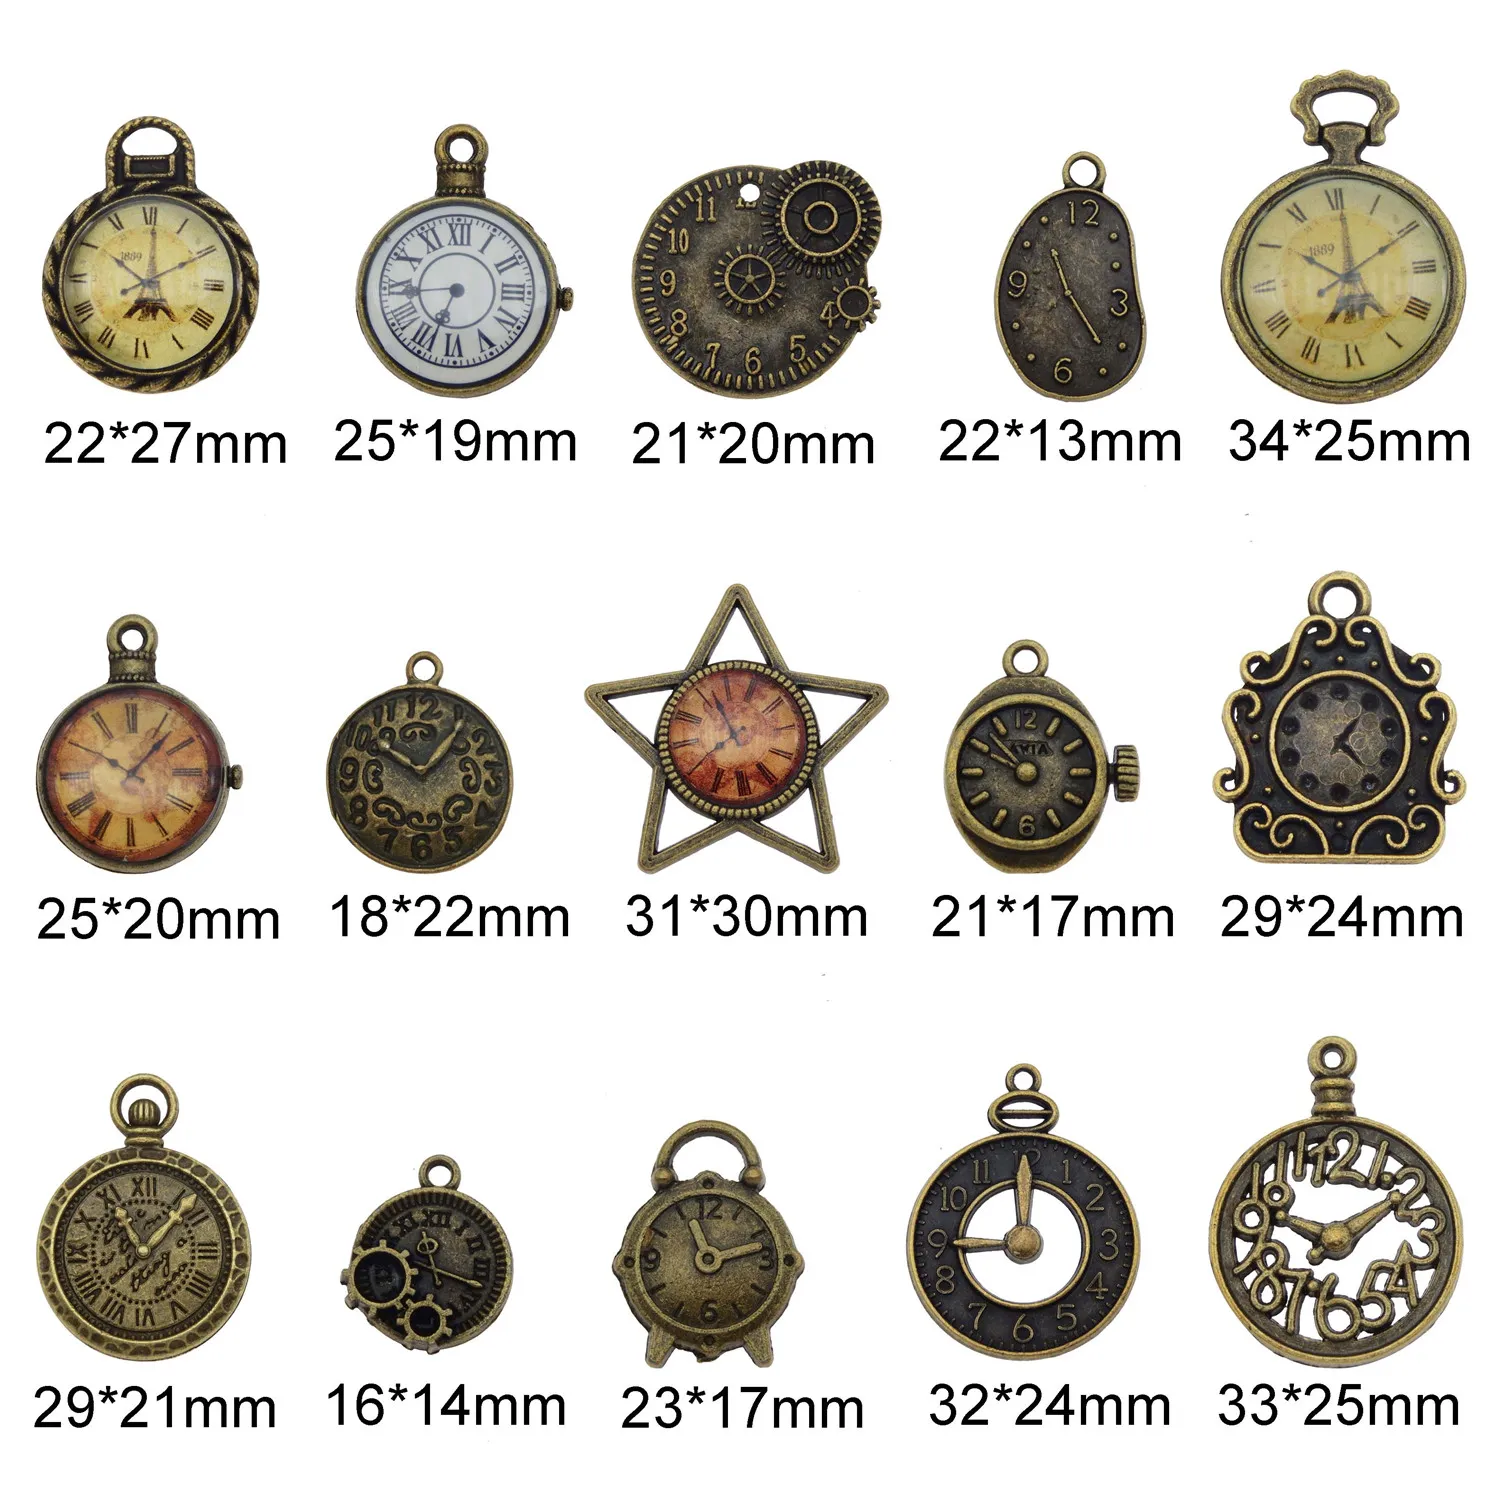 Random Mixed Clock Watch Face Components Charms Alloy Necklace Pendant Finding Jewelry Making Steampunk DIY Accessory306b